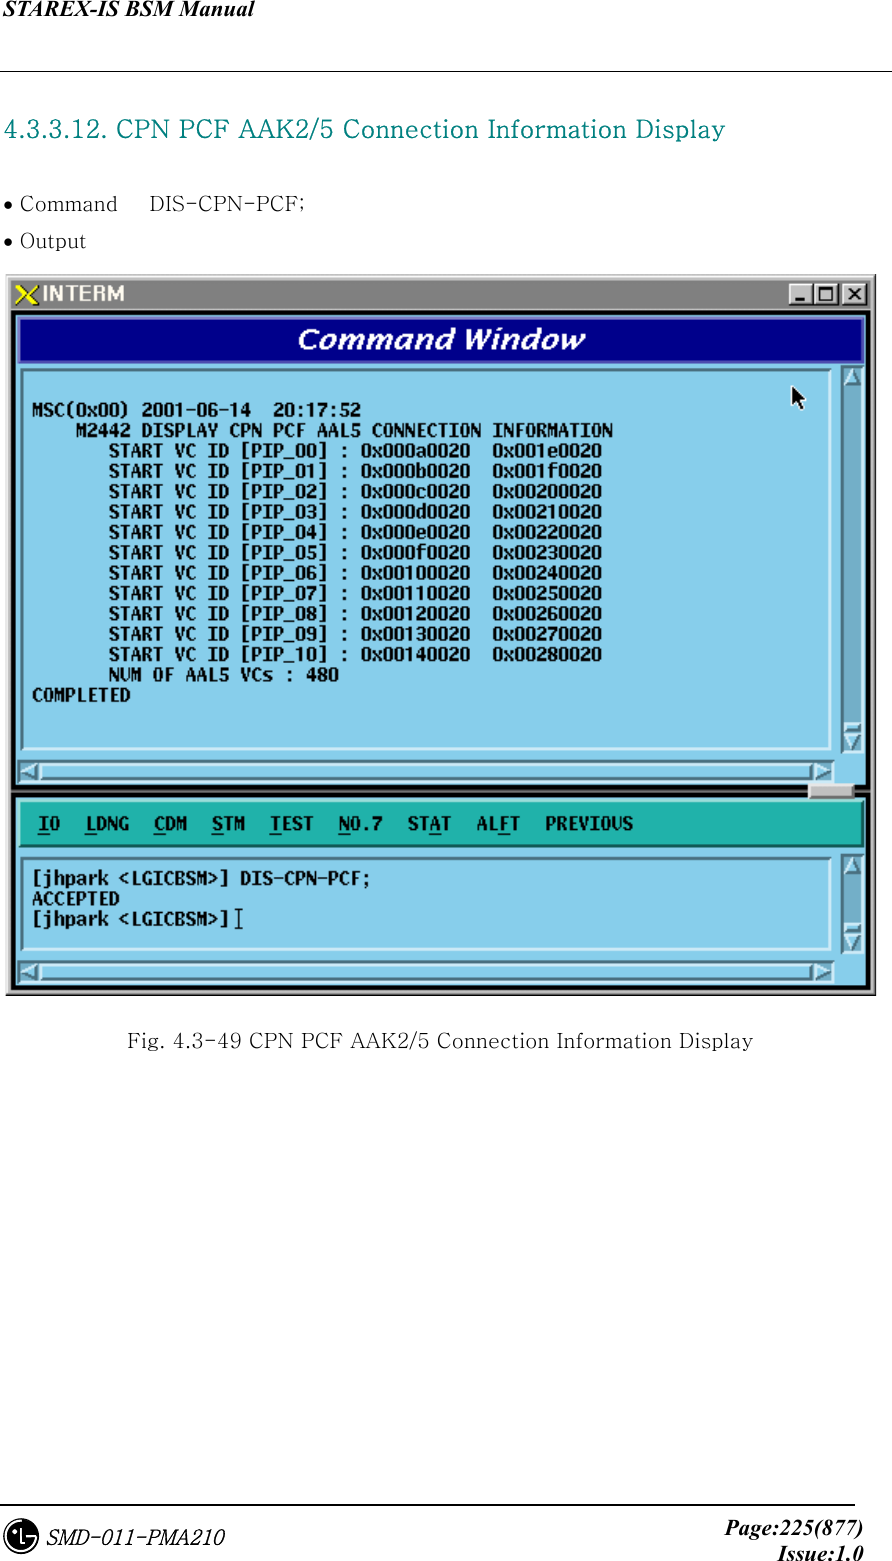 STAREX-IS BSM Manual     Page:225(877)Issue:1.0SMD-011-PMA210  4.3.3.12. CPN PCF AAK2/5 Connection Information Display  • Command   DIS-CPN-PCF; • Output  Fig. 4.3-49 CPN PCF AAK2/5 Connection Information Display 